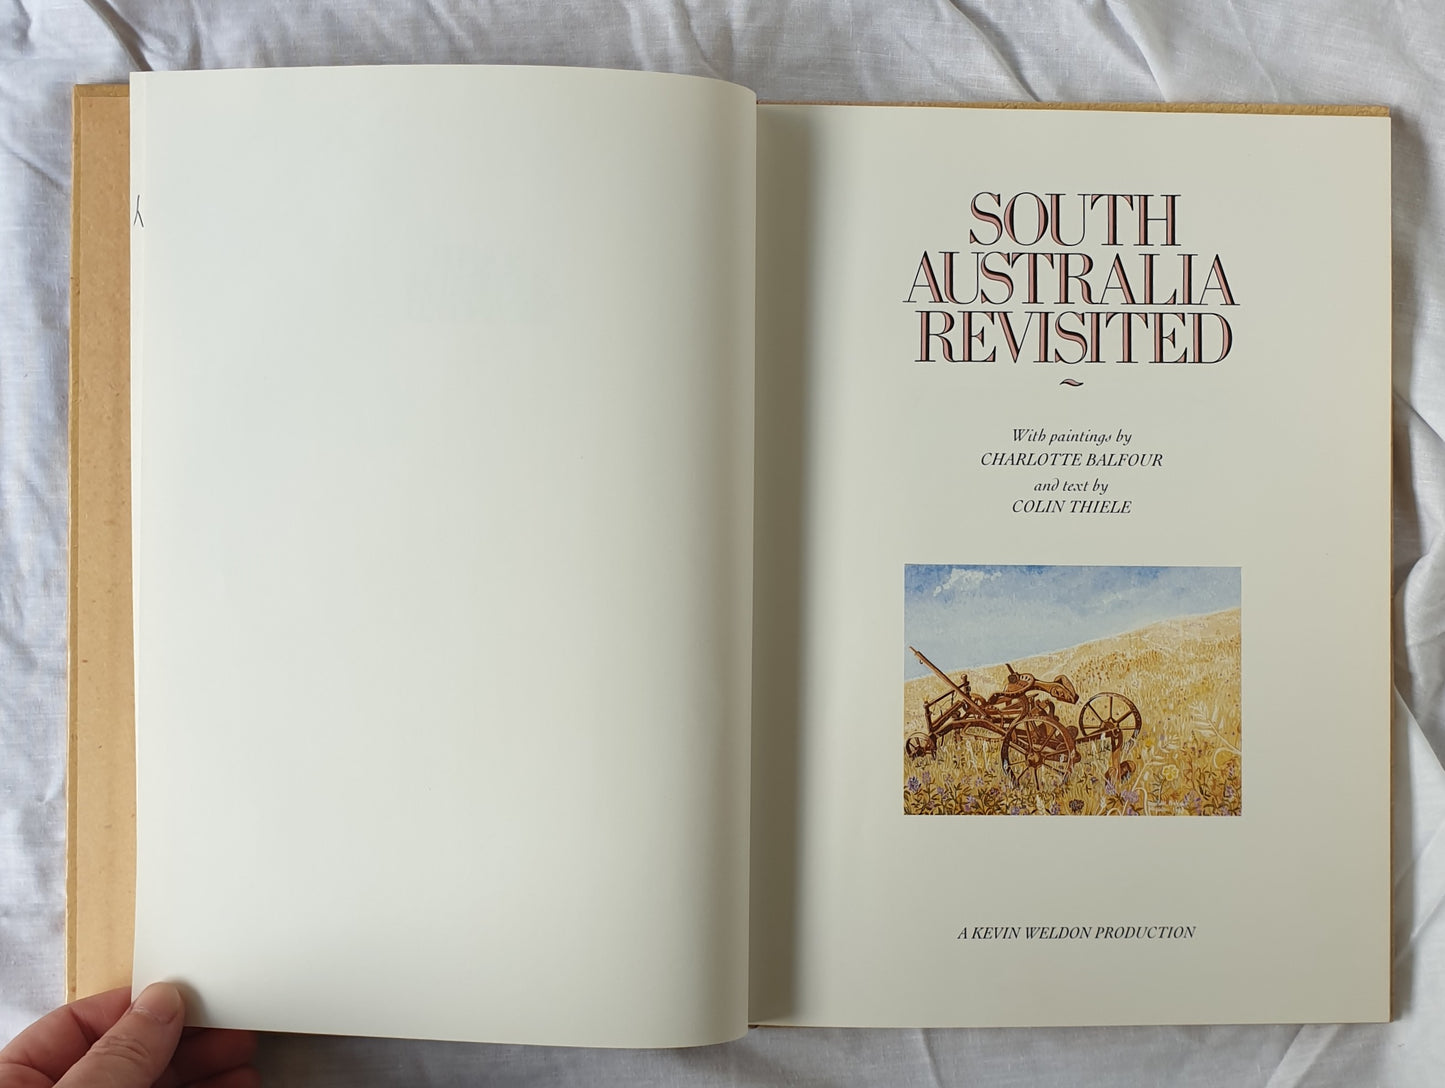 South Australia Revisited by Charlotte Balfour and Colin Thiele